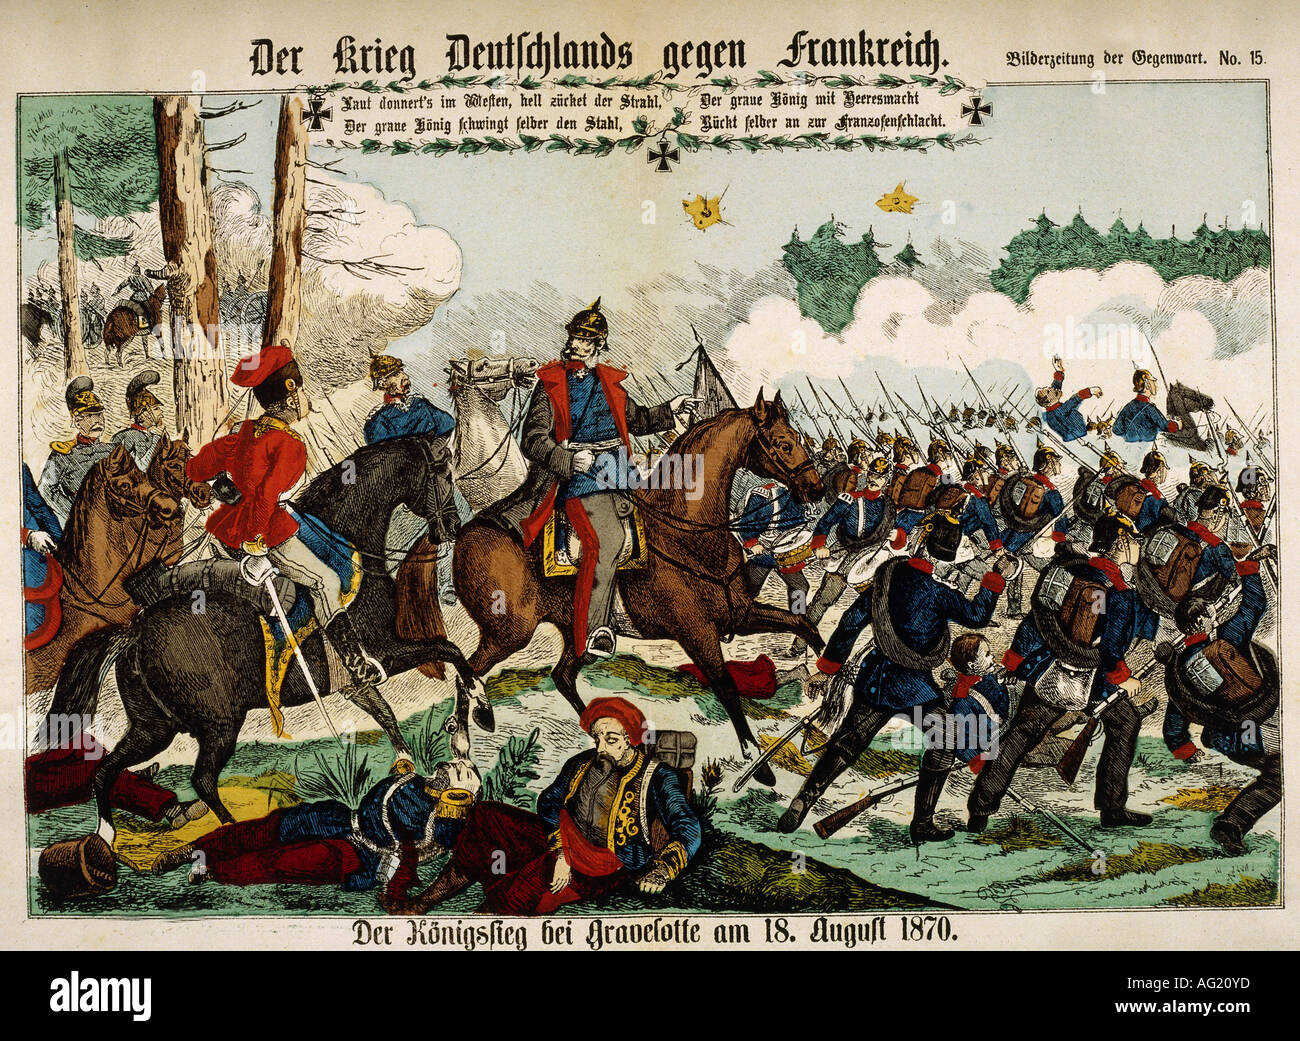 events, Franco-Prussian War 1870 - 1871, Battle of Gravelotte, 18.8.1870, engraving, 'Bildzeitung der Gegenwart', Nr.15, King William I of Prussia, 19th century, Germany, France, Franco Prussian, , Stock Photo